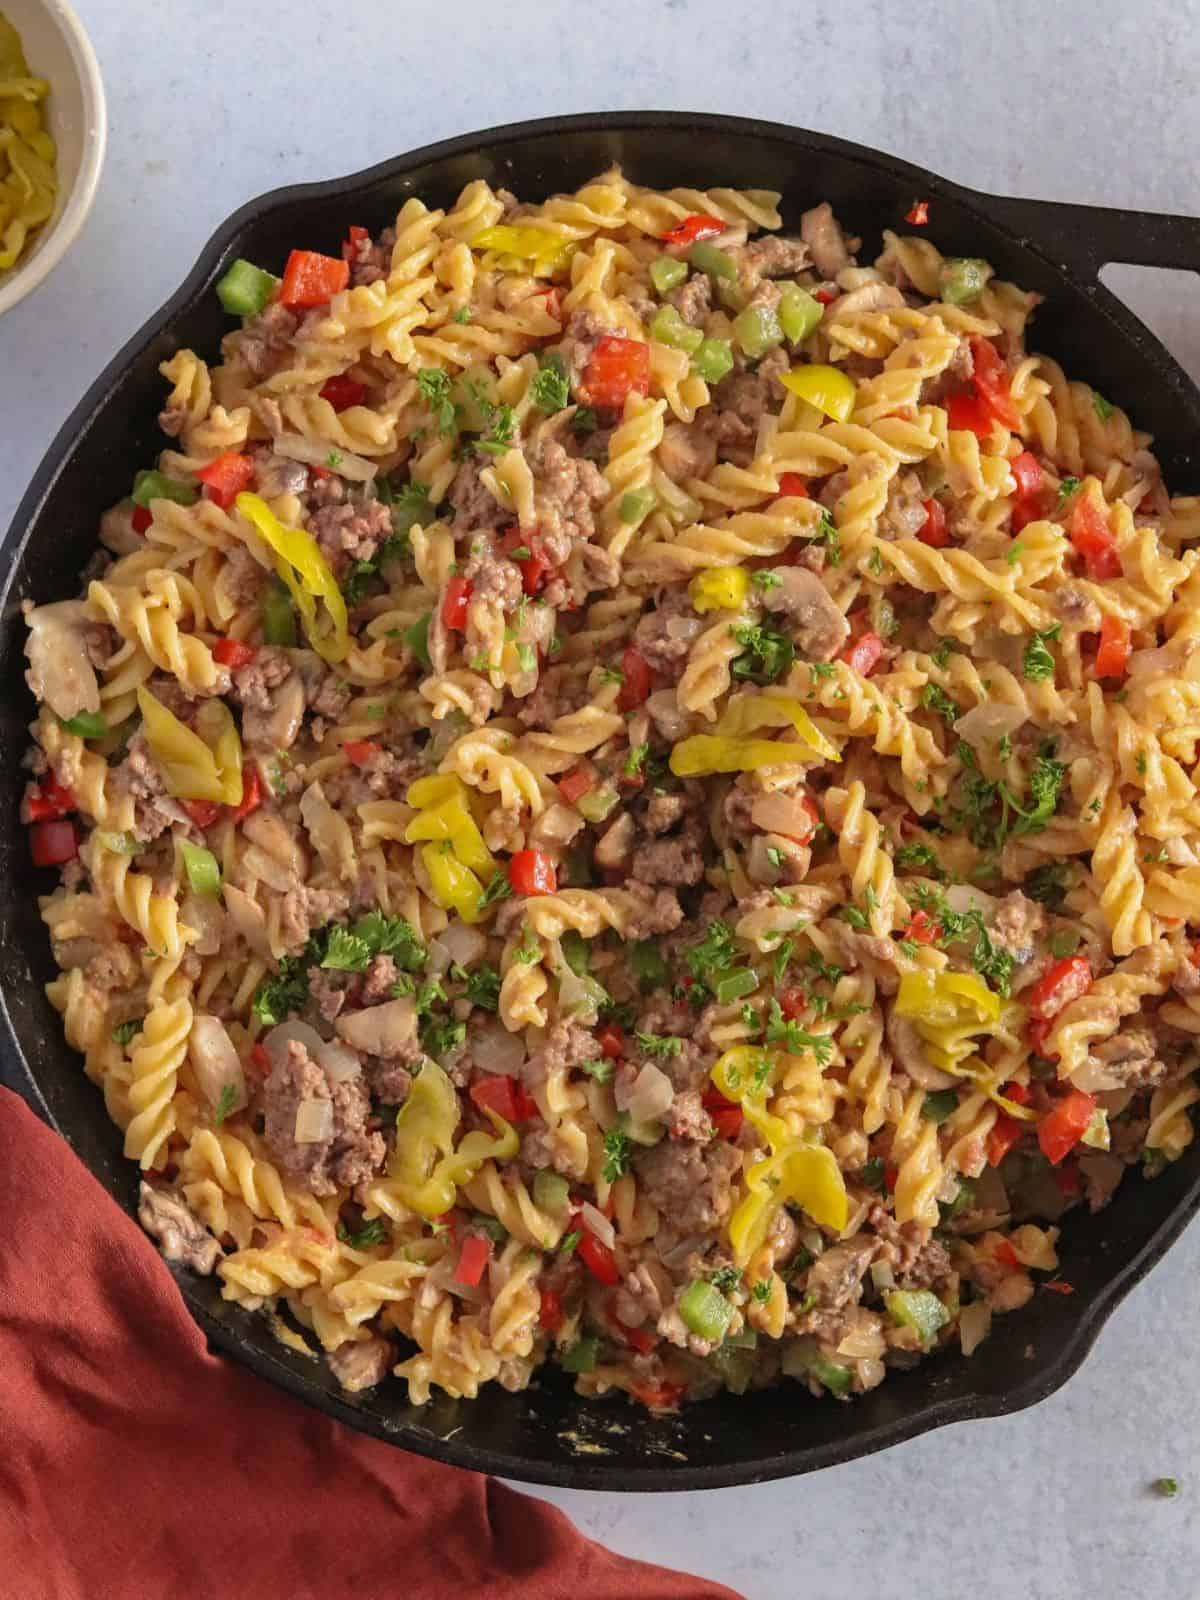 Noodles and beef in cast iron skillet with red napkin